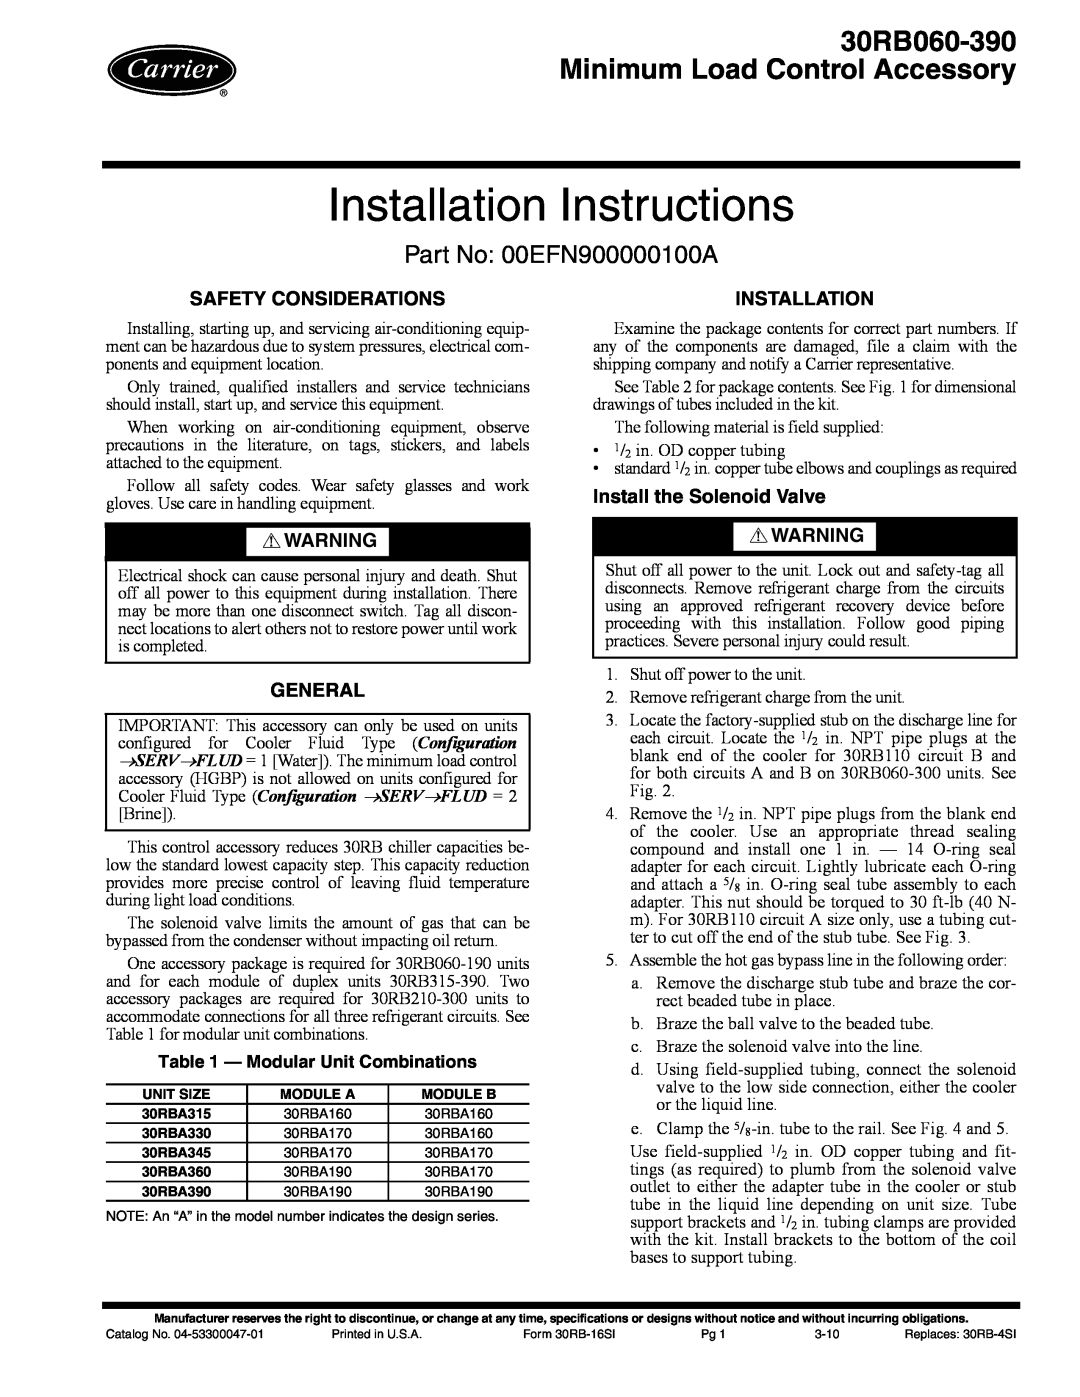 Carrier 30RB060-390 installation instructions Safety Considerations, General, Installation, Install the Solenoid Valve 